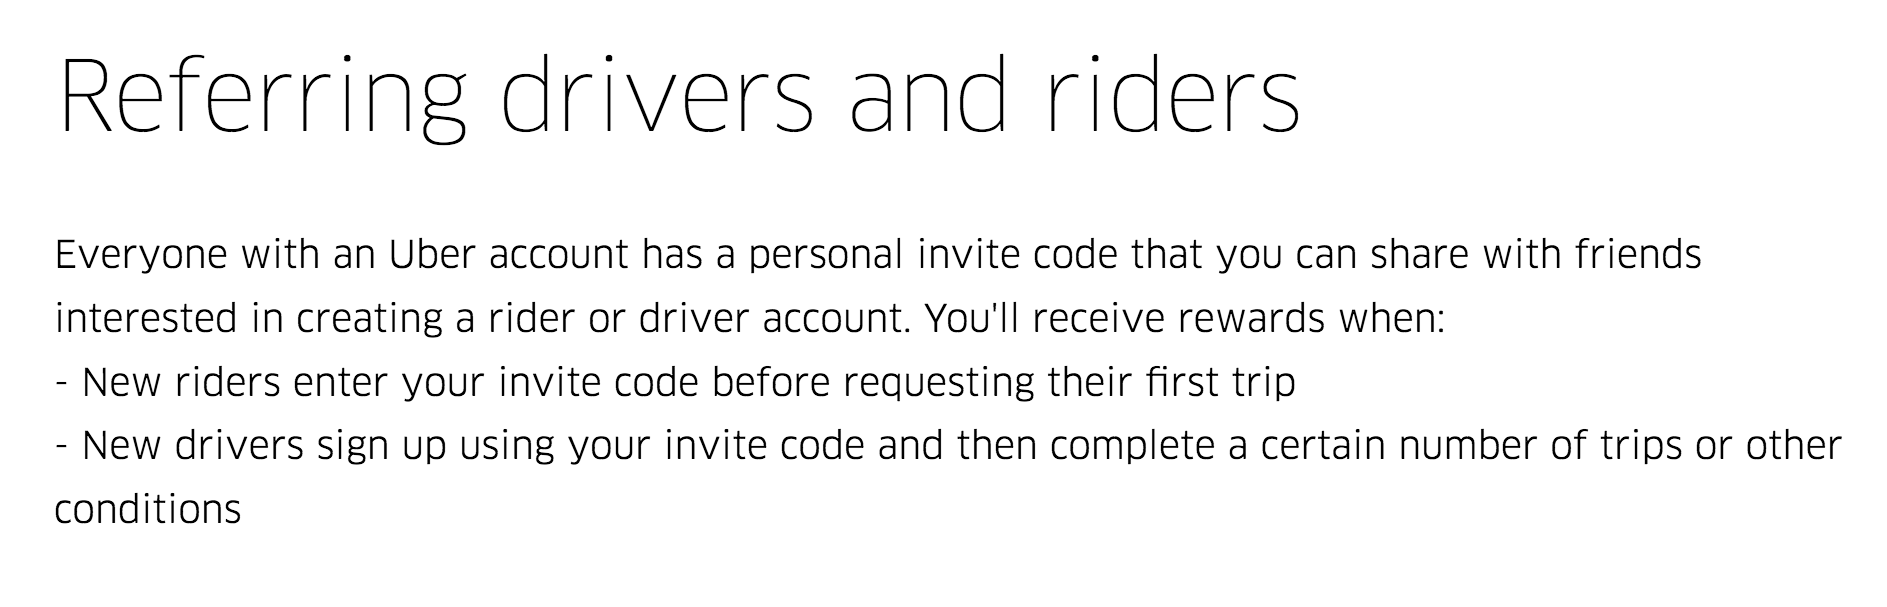 Check out this explanation of how Uber's referral program works